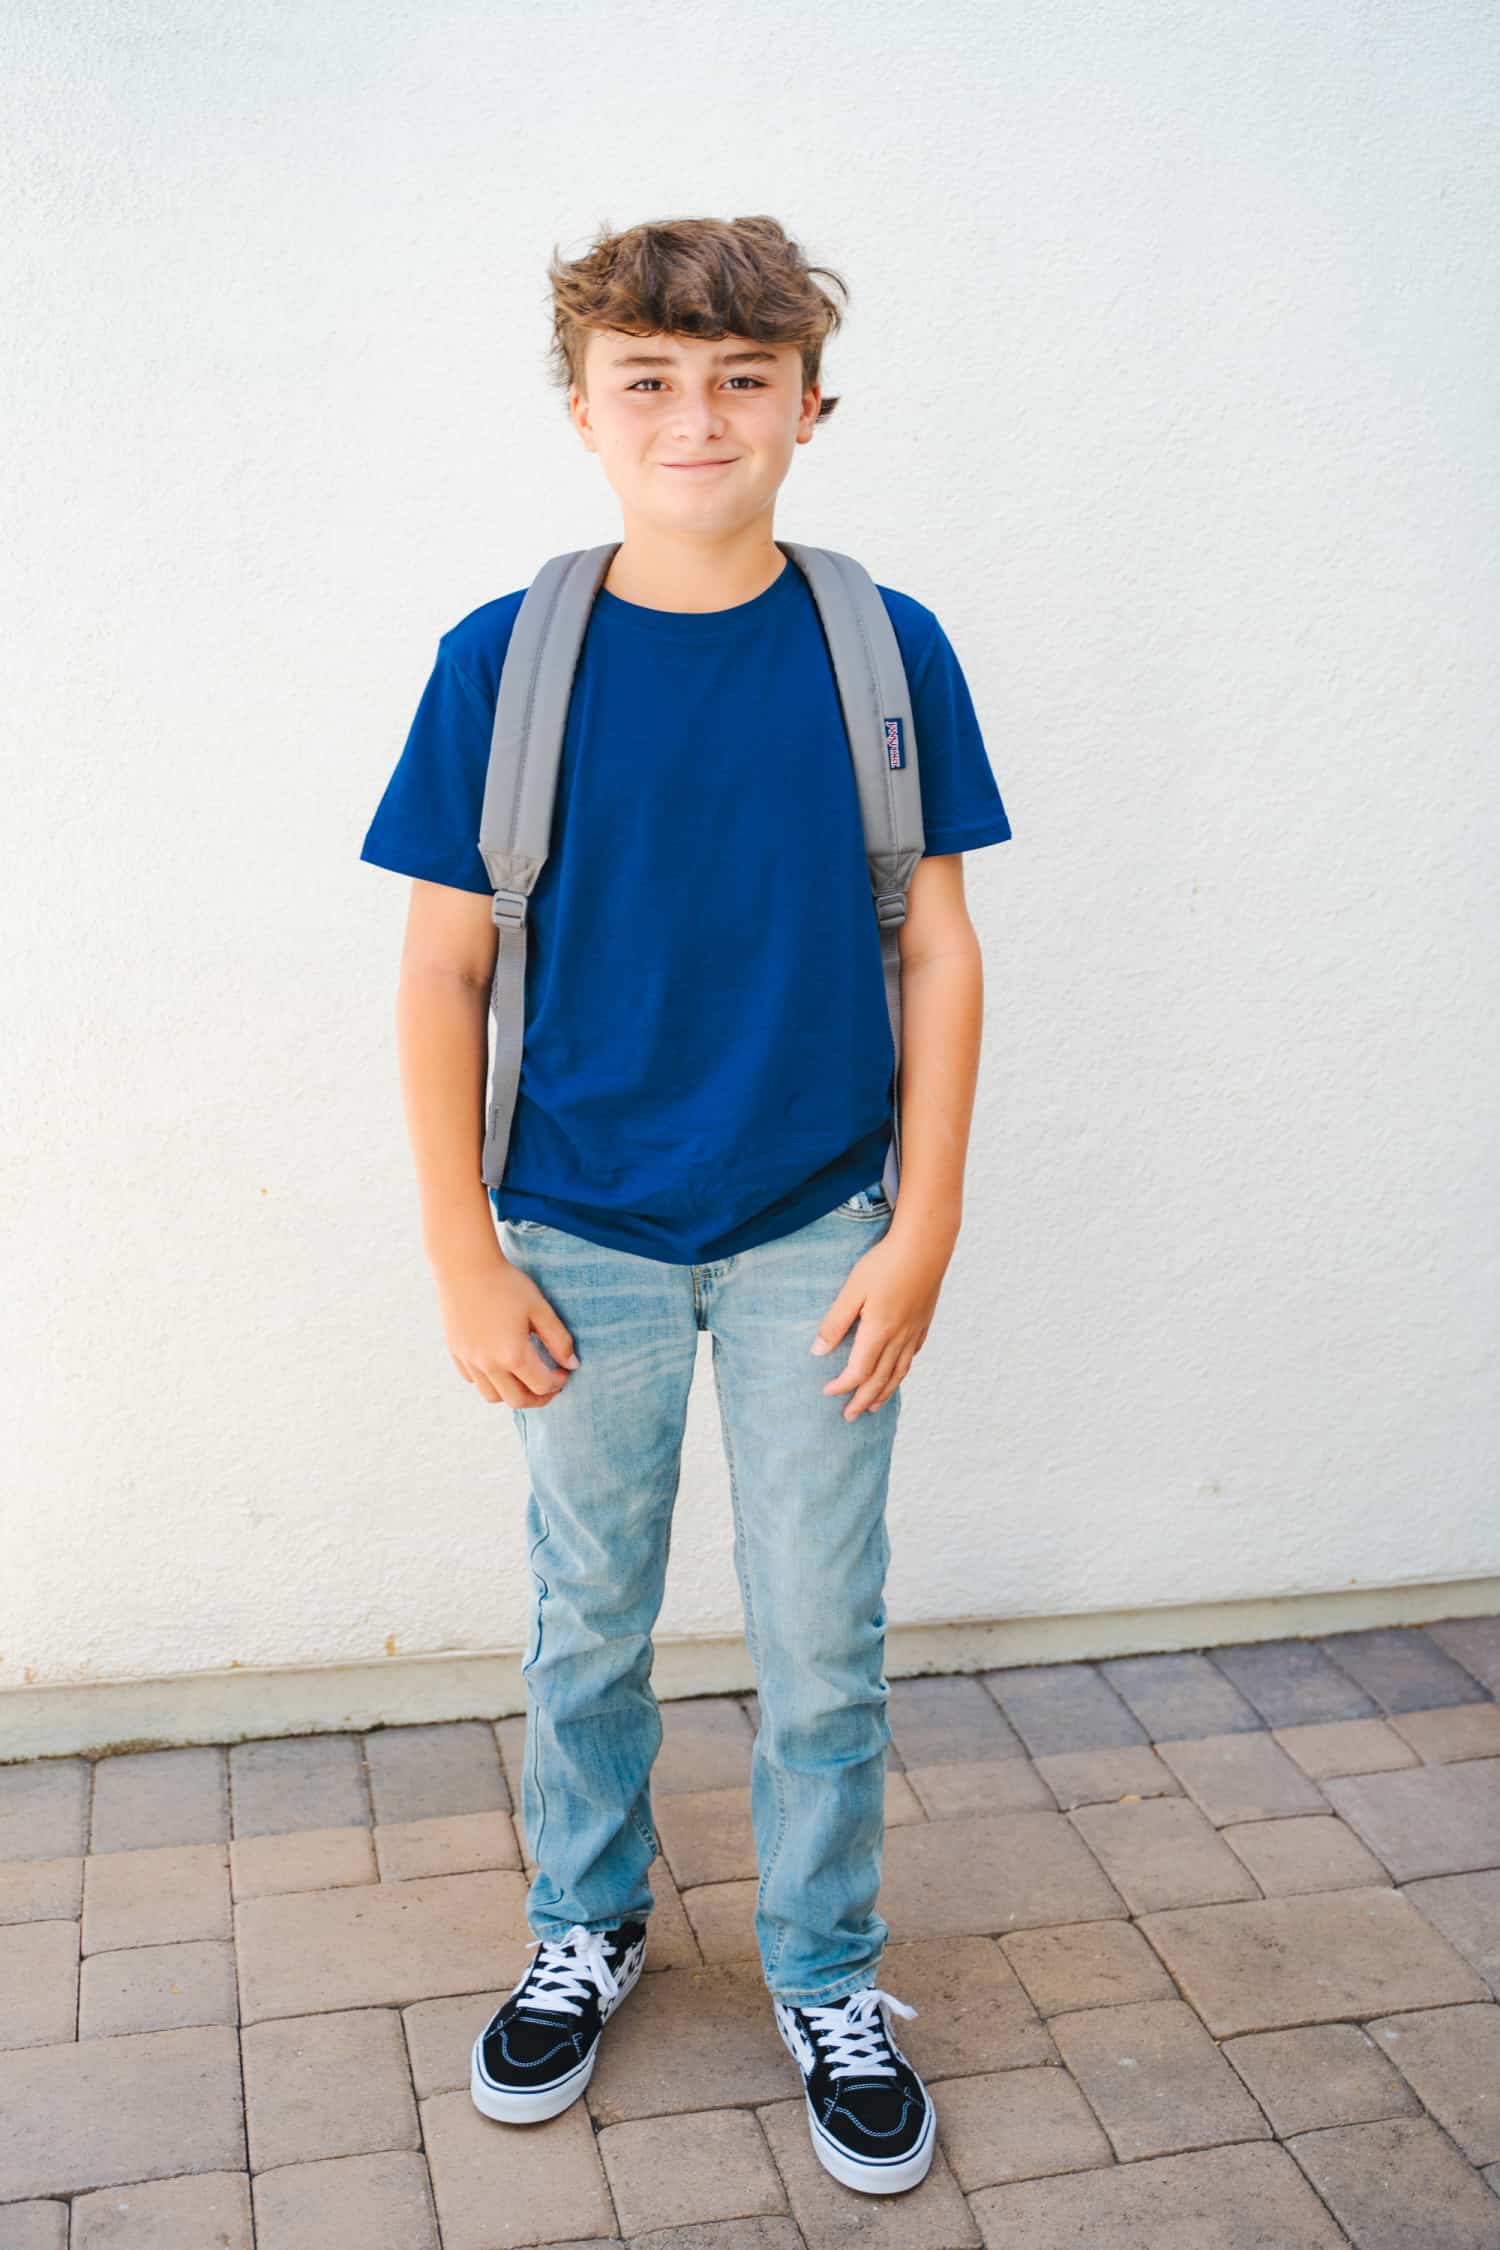 Adorable, smiling tween boy wearing Levi jeans, a bright blue t-shirt, black and white check Vans sneakers, and a grey JanSport backpack after back-to-school shopping at Kohl's.